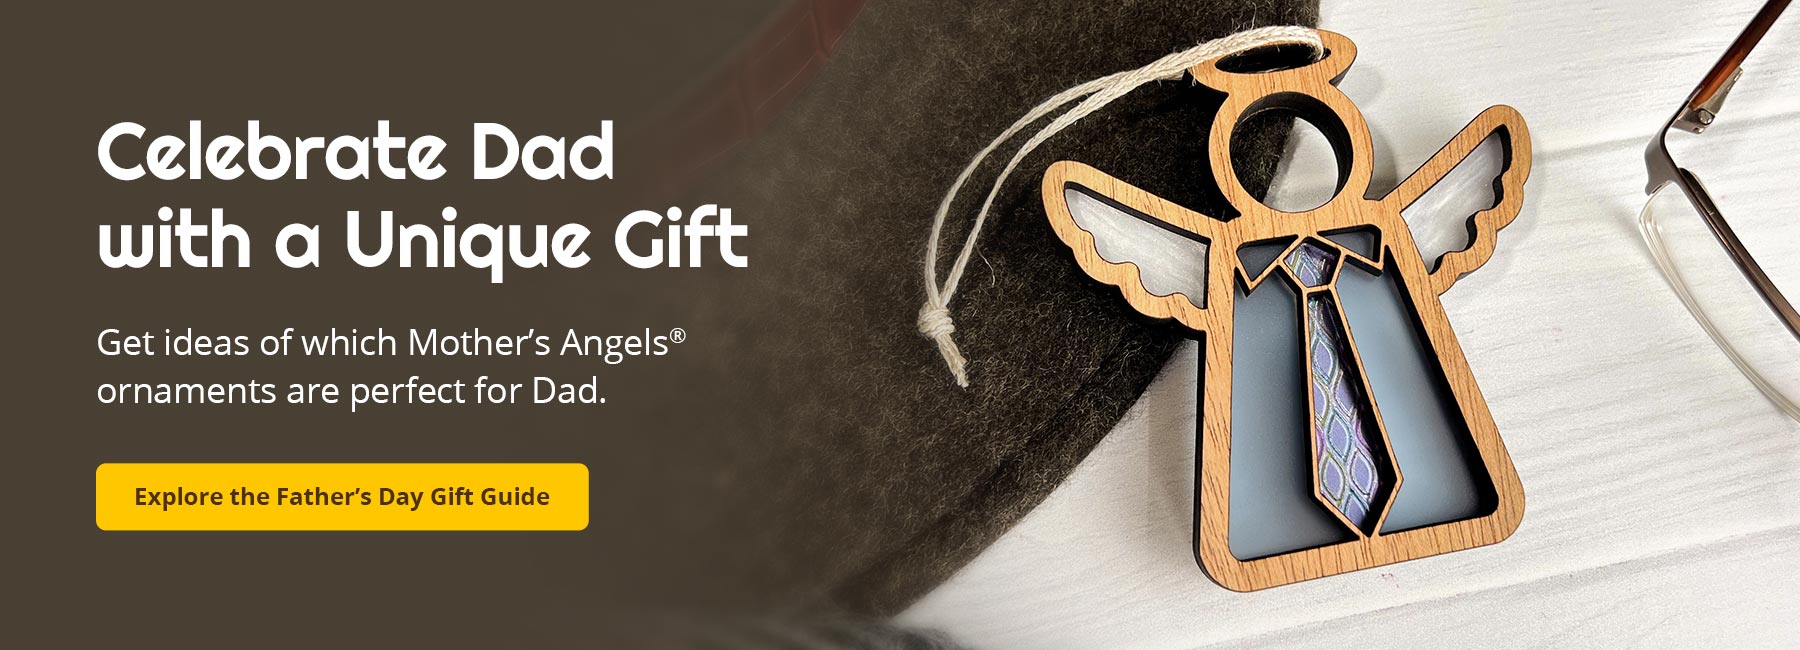 Celebrate Dad with a Unique Gift. Get ideas of which Mother’s Angels® ornaments are perfect for Dad. Explore the Father's Day Gift Guide.